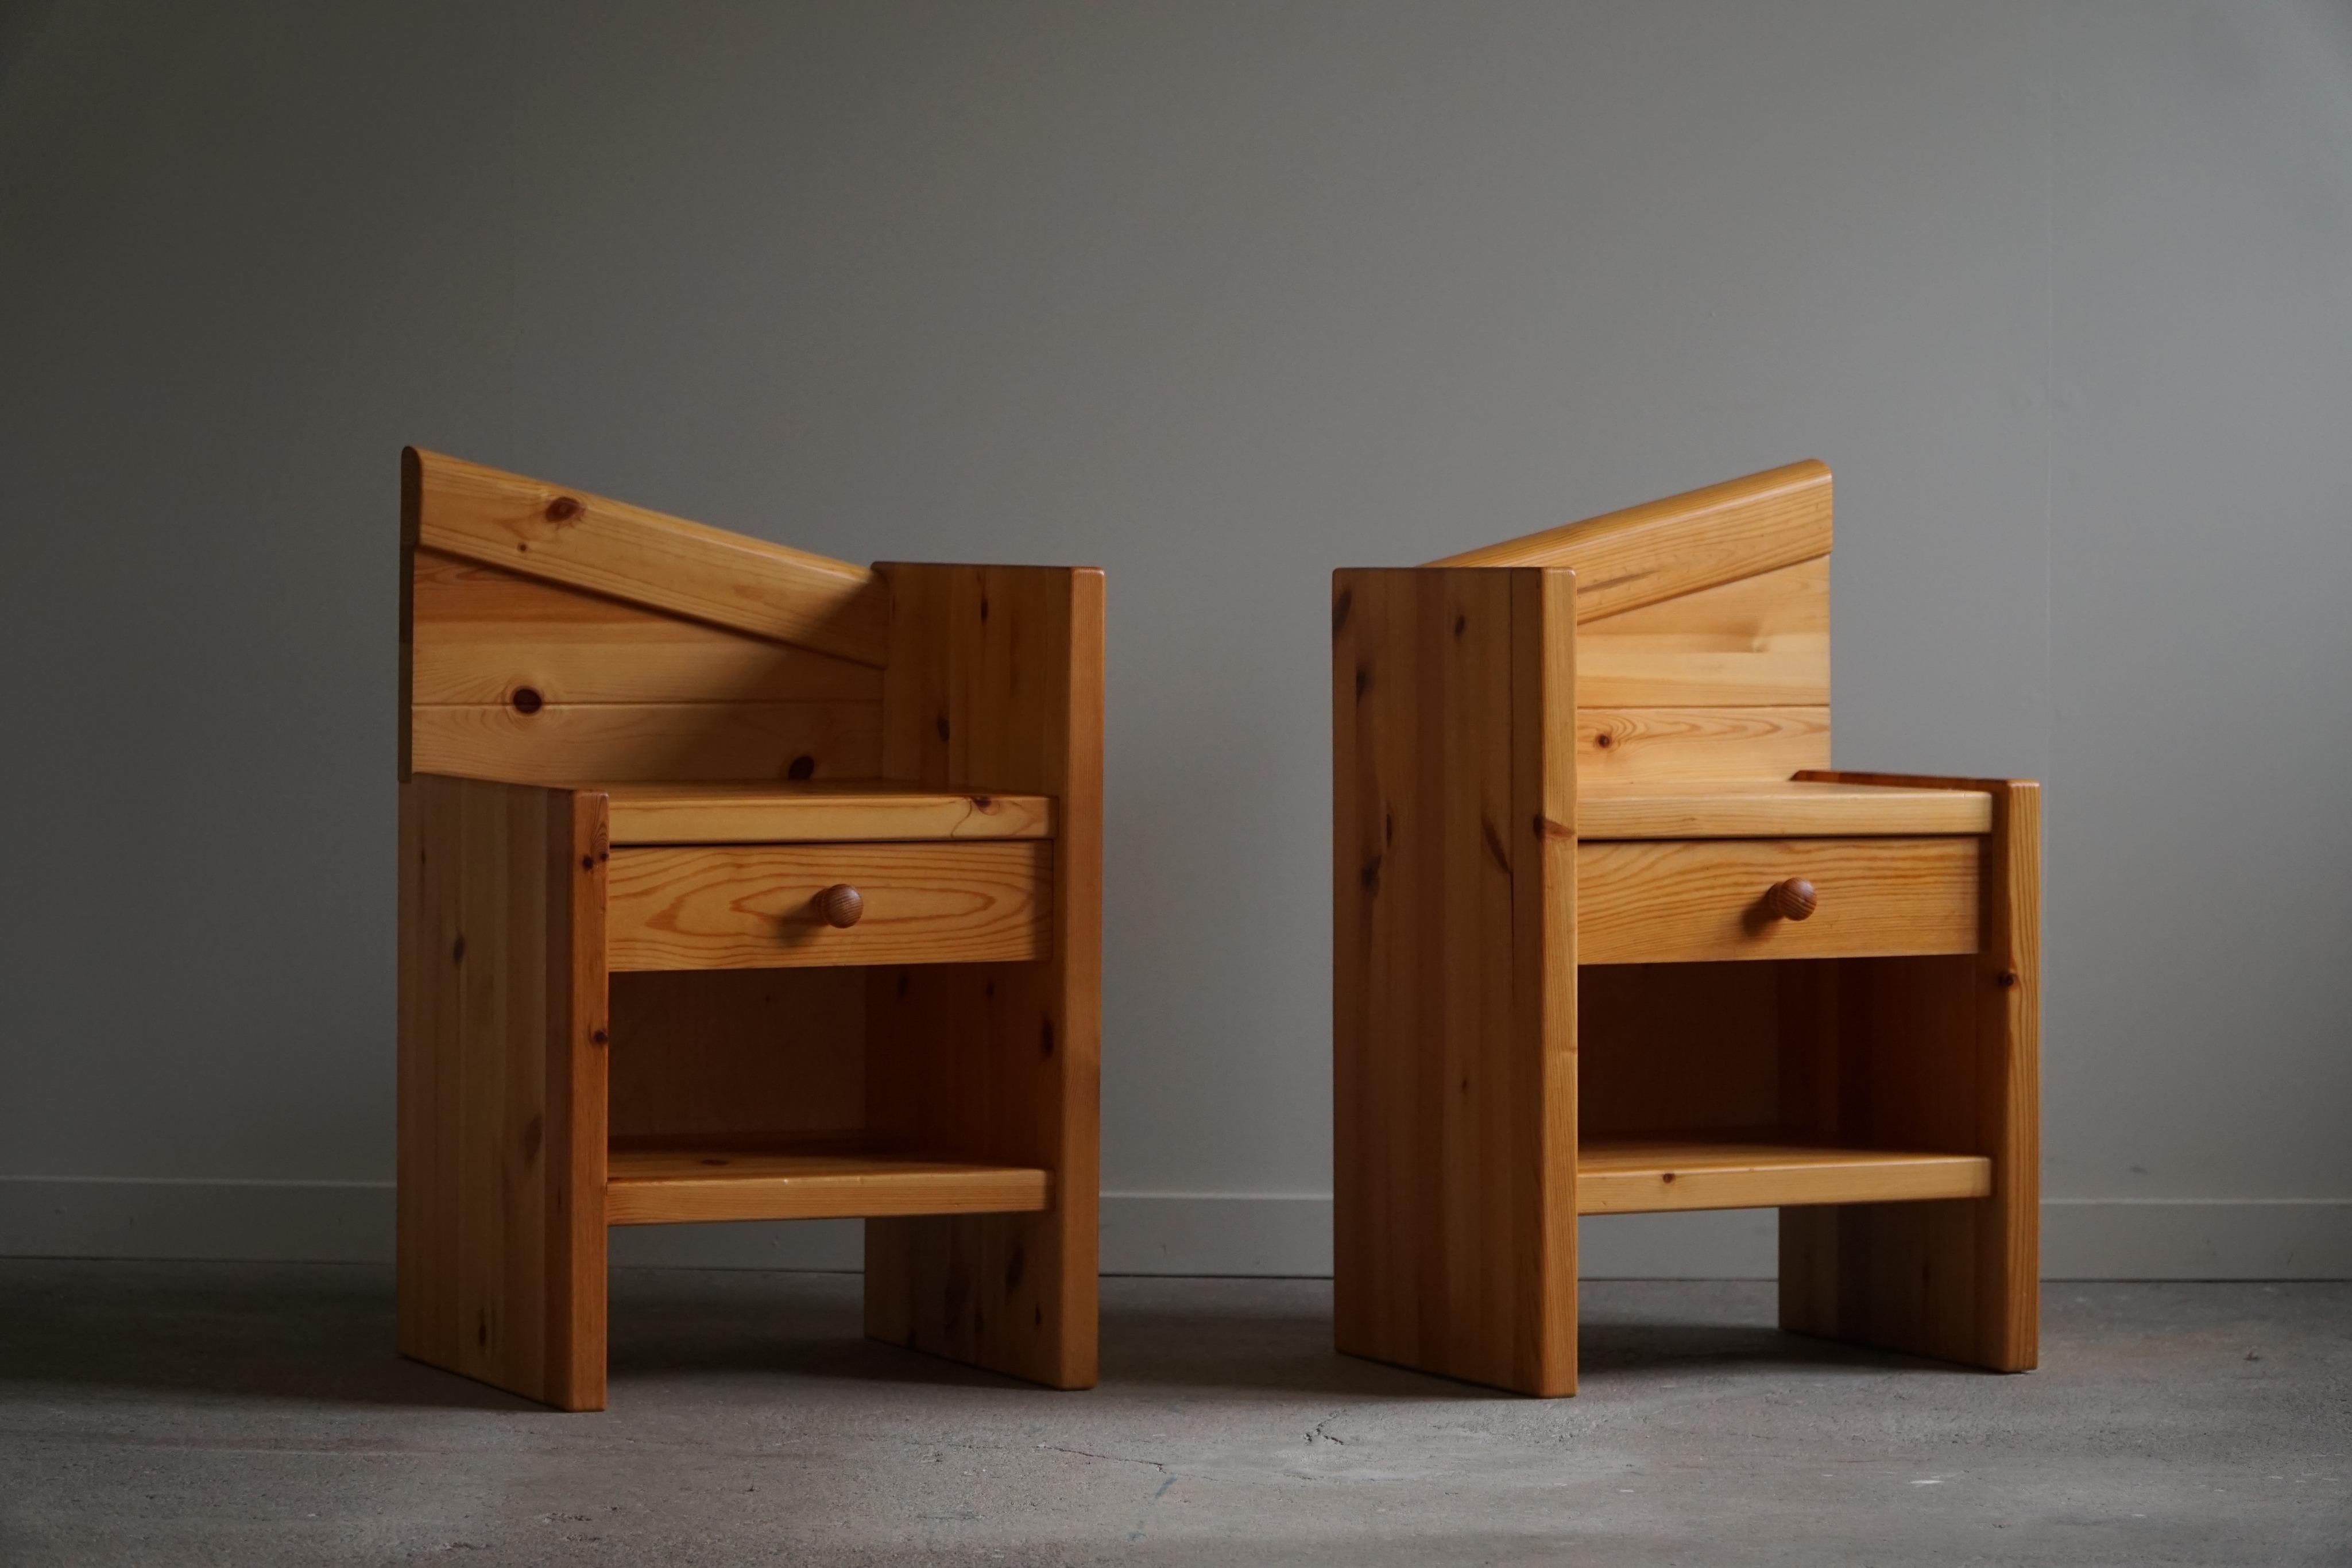 A pair of Scandinavian night stands / side tables in pine, made in Denmark, circa in 1970s by an unknown cabinetmaker. These night stands come with drawers and some angled corners. 

The night stands are nicely patinated with some traces of